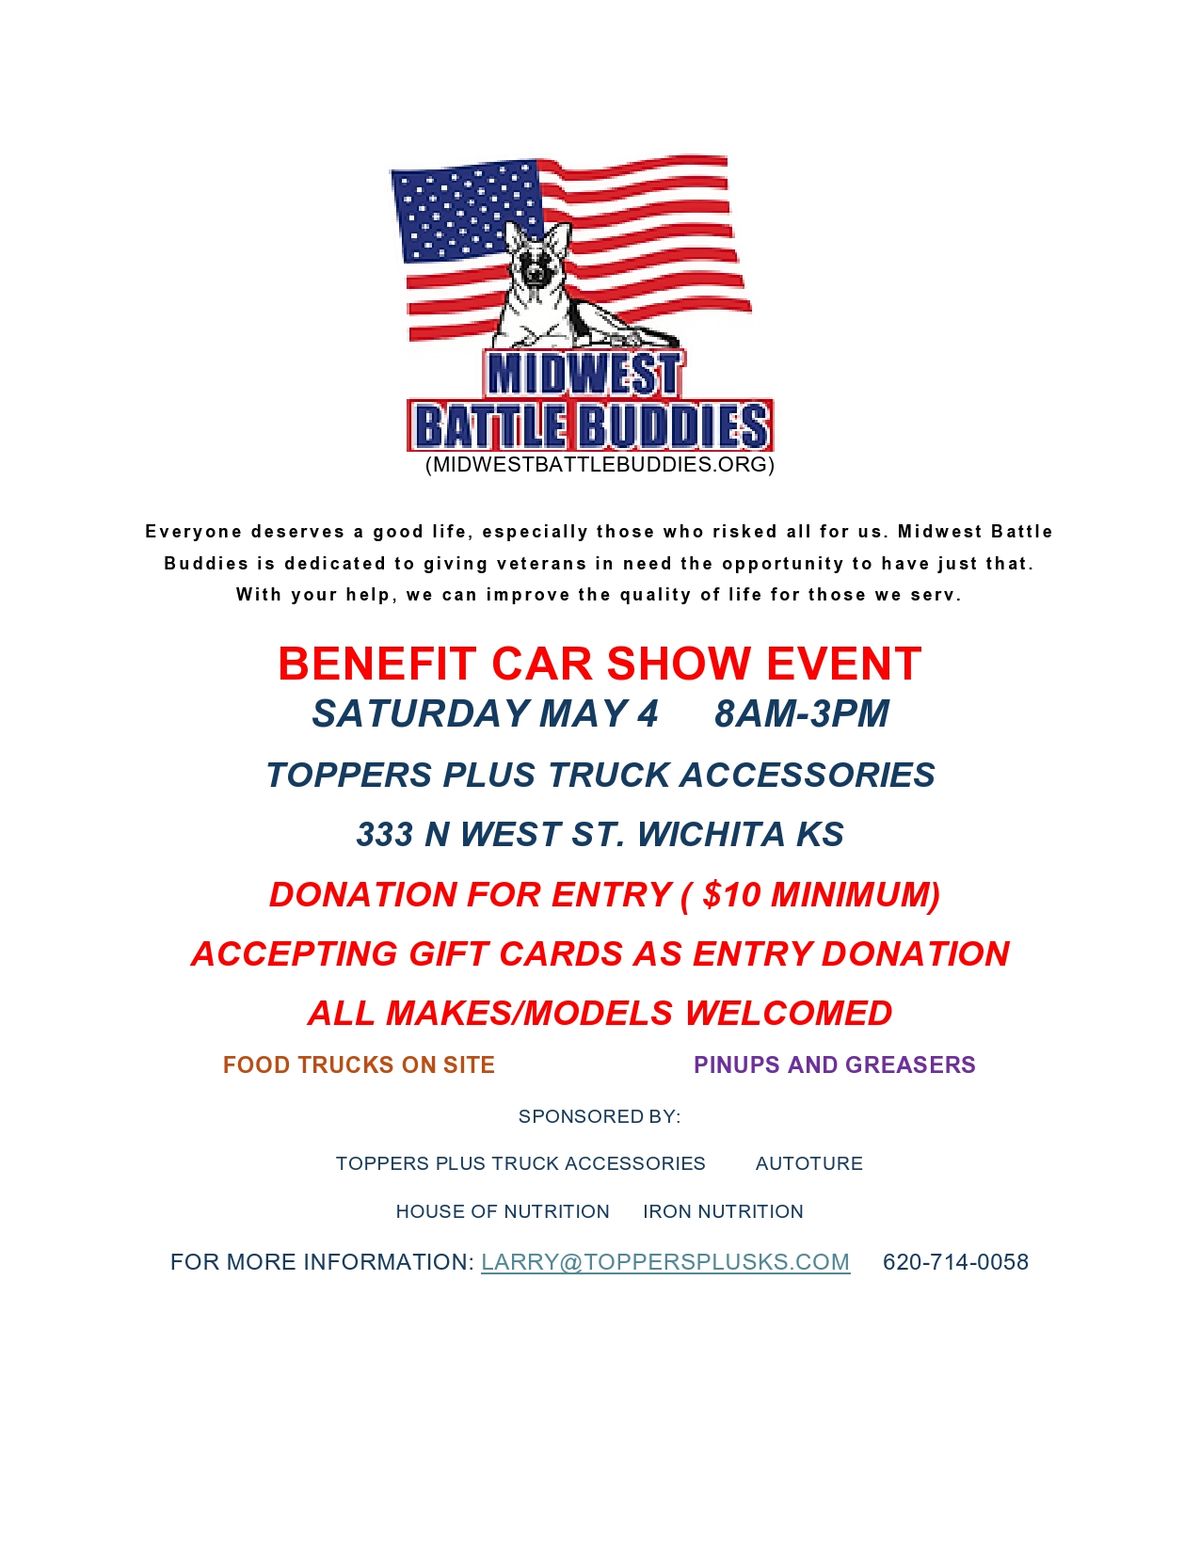 FUNDRAISER FOR MIDWEST BATTLE BUDDIES